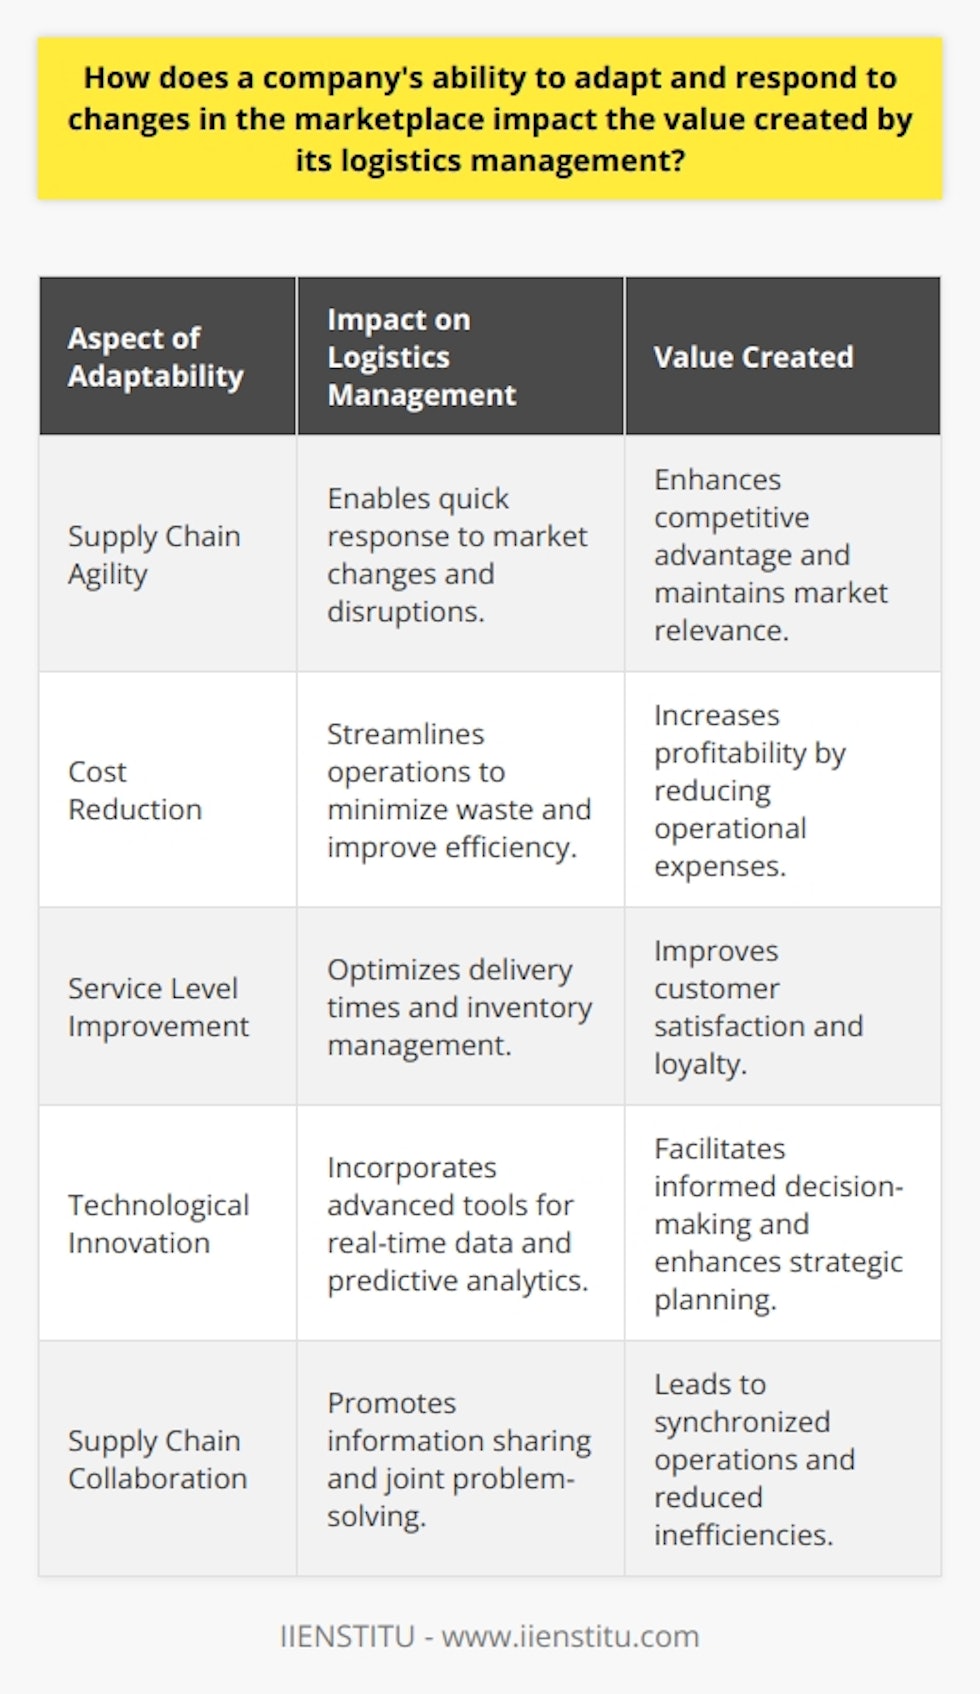 The dynamic nature of today's marketplace demands that companies exhibit an exceptional level of adaptability in their business operations, particularly in logistics management. The agility of a company's supply chain can significantly influence its ability to create value and maintain a competitive advantage.Logistics management is at the core of a company's operational efficiency. It addresses the movement and storage of goods, coordination of supply chains, and information flow necessary to satisfy customer demands. When a company can seamlessly manage these aspects, it can reduce costs, improve service levels, and enhance the customer experience – all of which contribute to increased value.An agile logistics operation is responsive and flexible; it can quickly adjust to market volatility, supply chain disruptions, consumer demand shifts, and technological changes. This responsiveness is vital in a marketplace where customer preferences can change rapidly, and the ability to meet these changes can make the difference between success and failure.Strategic flexibility in logistics encompasses diversified sourcing and distribution strategies that ensure a company is not overly dependent on single supply chains, which can be vulnerable to disruptions. Multiple sourcing and fulfillment options provide the agility needed to pivot operations in the face of supply challenges or shifts in demand.Investing in advanced digital tools and technologies such as AI for demand forecasting, IoT for inventory management, and blockchain for enhancing supply chain transparency can facilitate this adaptability. These technologies provide real-time data that is critical for making informed decisions quickly, which is essential for logistics agility.Furthermore, collaboration and information sharing between all stakeholders in the supply chain (suppliers, distributors, and customers) enhance value creation. Shared data leads to synchronized supply chains, which can result in reduced inventories, lower costs, and higher service levels. Companies that promote a culture of collaboration and transparency in their logistics networks can more effectively manage the complexities of the modern marketplace.To summarize, a company's capacity to rapidly adjust and respond to changes in the marketplace can greatly enhance the value derived from its logistics management. By fostering an agile supply chain, emphasizing strategic flexibility, leveraging technology, and encouraging collaboration and information sharing, companies can optimize logistics operations to not only meet customer expectations but exceed them, securing their position in the competitive landscape.